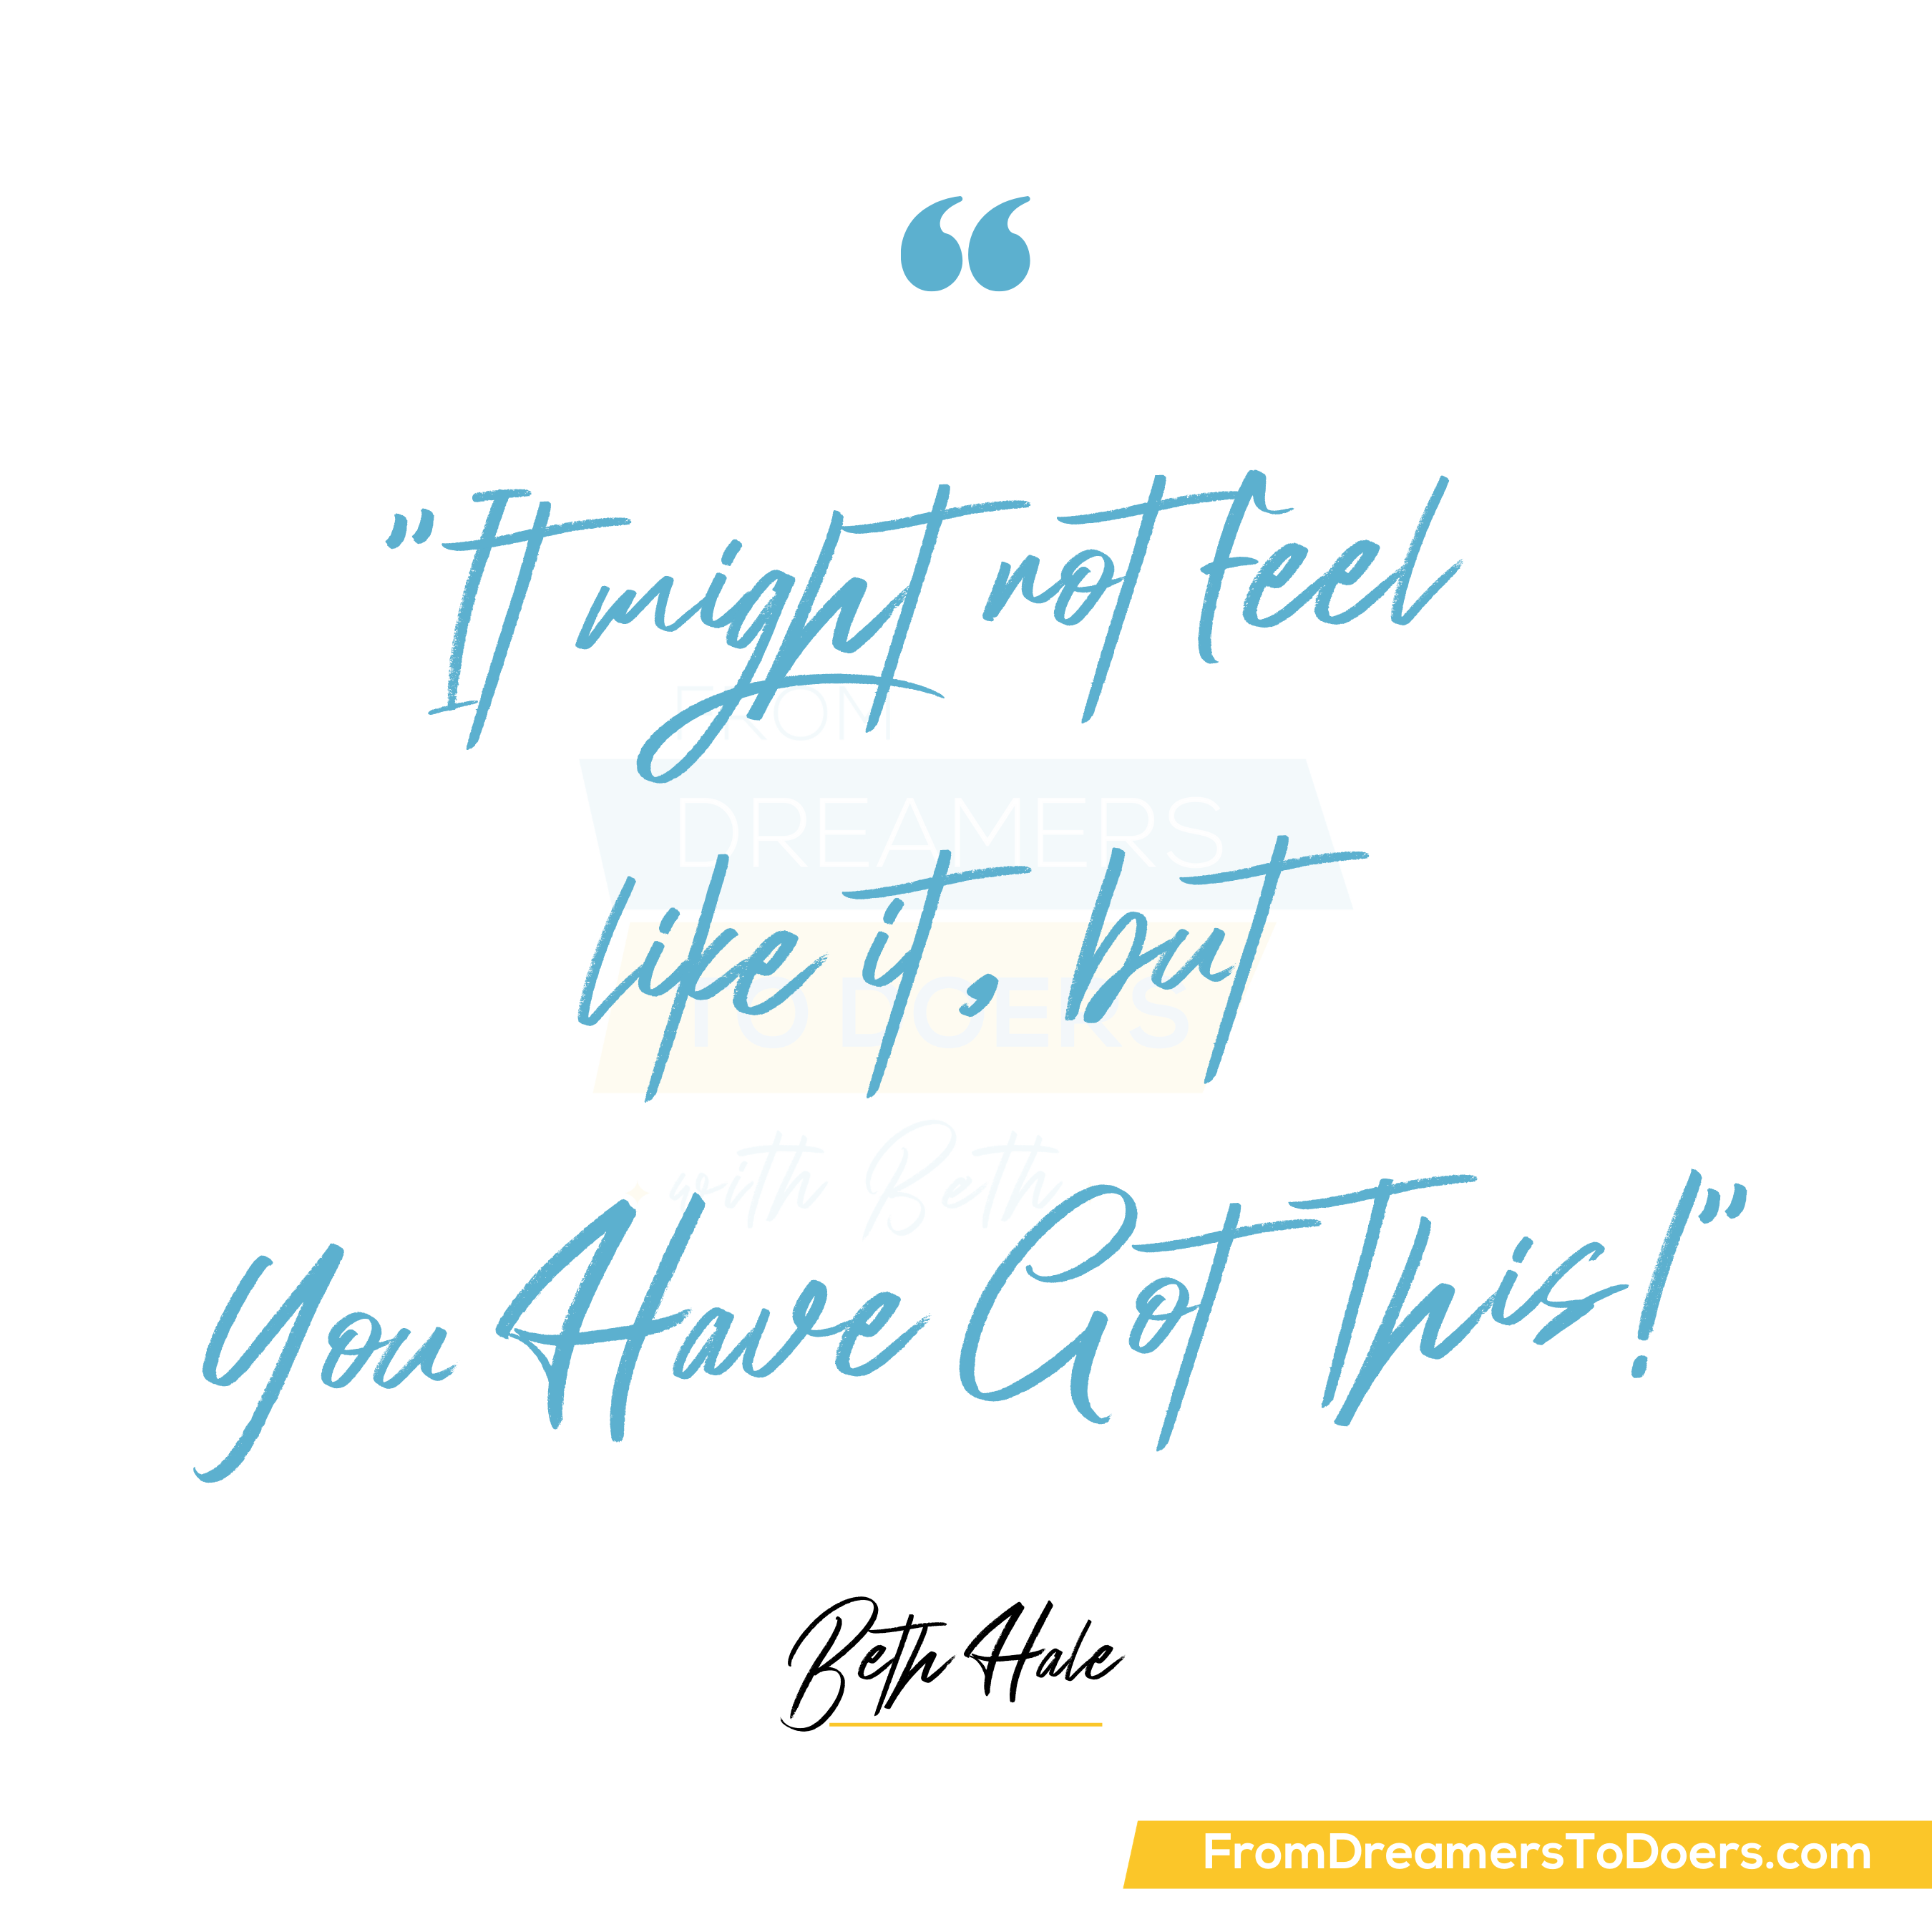 "It might not feel like it, but you have got this!" - Beth Hale. From Dreamers to Doers podcast.